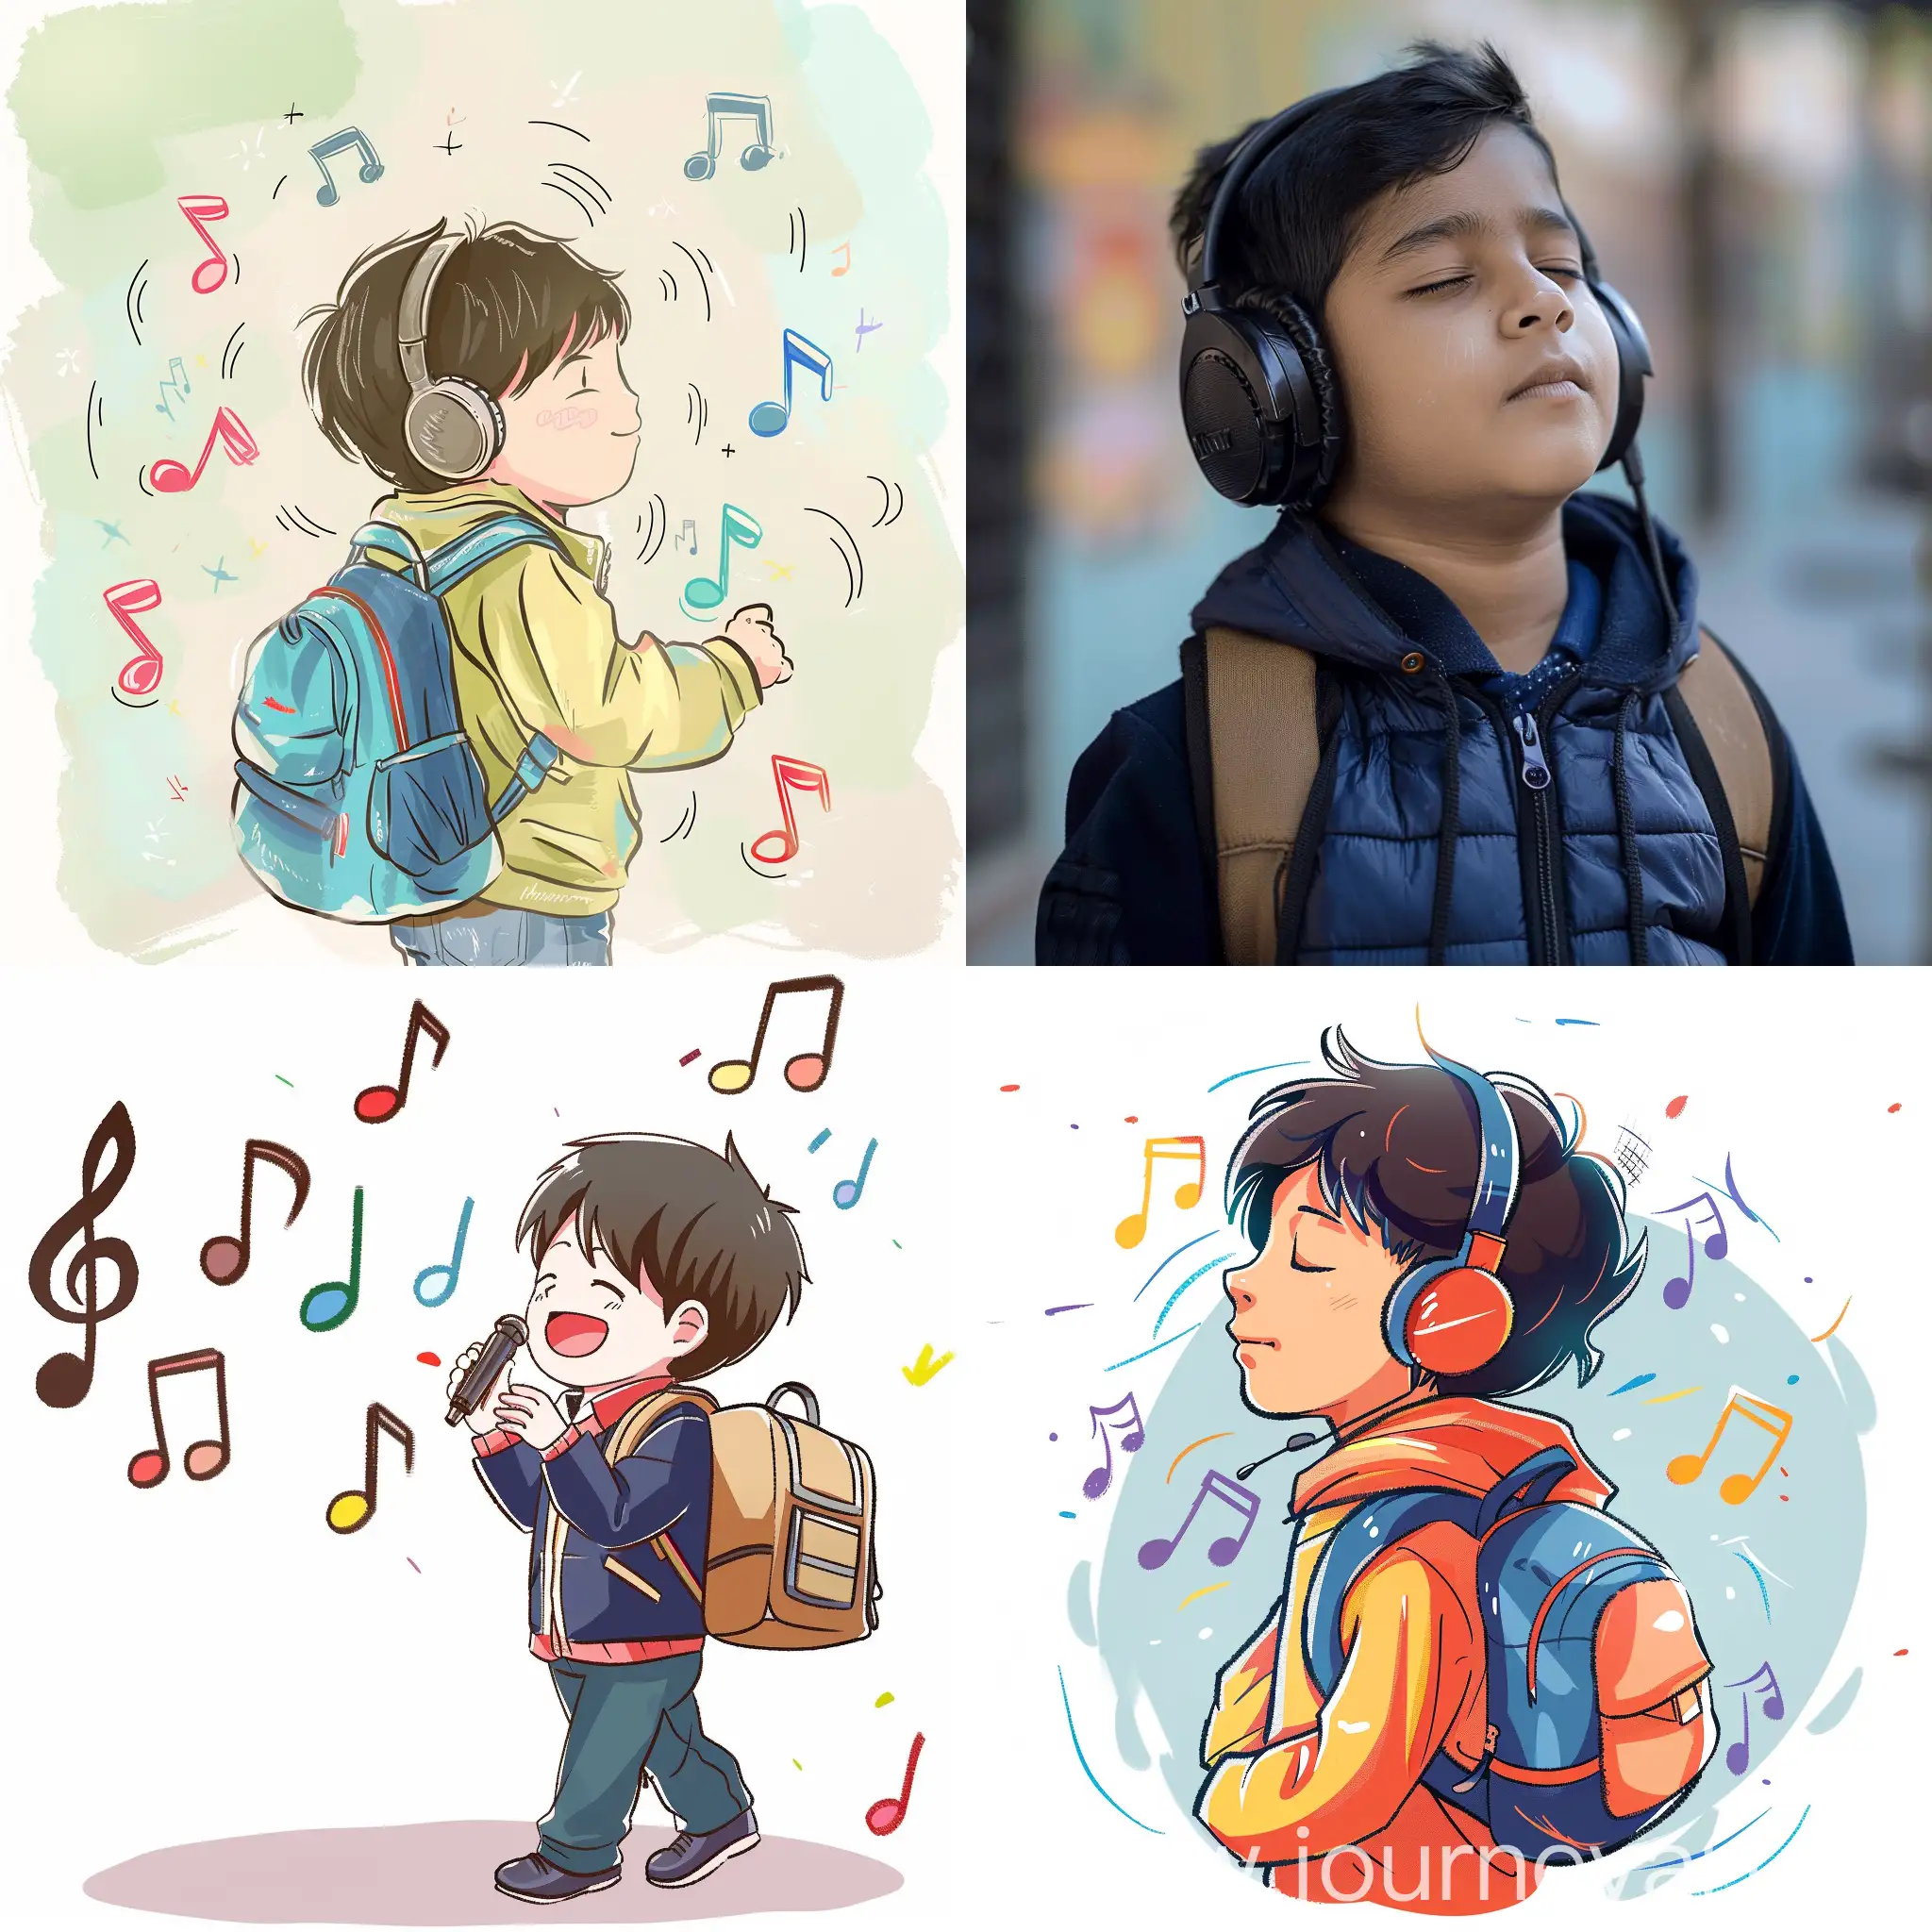 Young-Boy-Commuting-to-School-while-Listening-to-Music